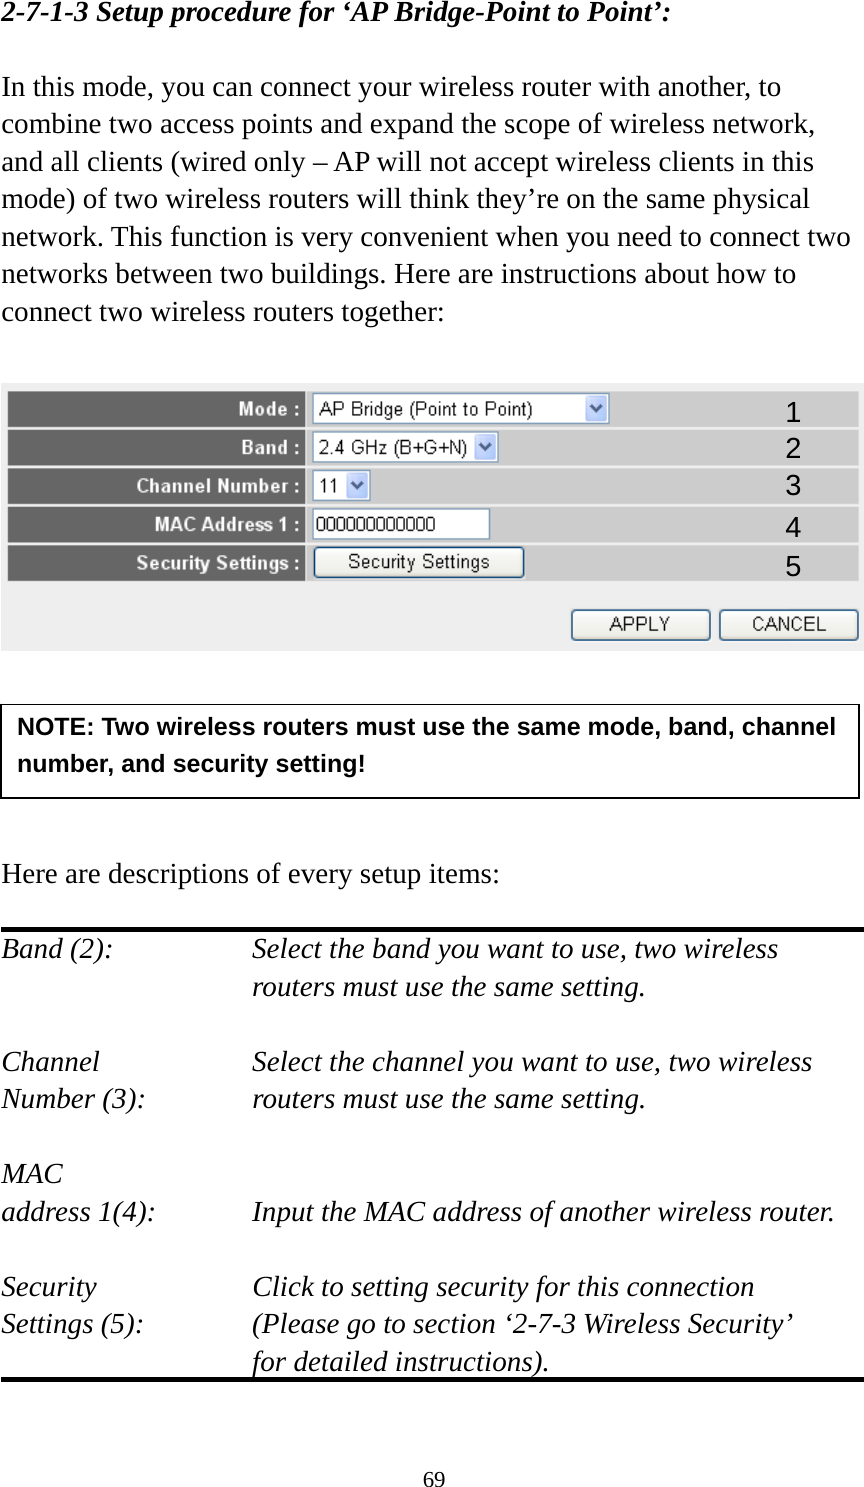 69 2-7-1-3 Setup procedure for ‘AP Bridge-Point to Point’:  In this mode, you can connect your wireless router with another, to combine two access points and expand the scope of wireless network, and all clients (wired only – AP will not accept wireless clients in this mode) of two wireless routers will think they’re on the same physical network. This function is very convenient when you need to connect two networks between two buildings. Here are instructions about how to connect two wireless routers together:        Here are descriptions of every setup items:  Band (2):  Select the band you want to use, two wireless routers must use the same setting.  Channel  Select the channel you want to use, two wireless Number (3):  routers must use the same setting.  MAC address 1(4):  Input the MAC address of another wireless router.  Security    Click to setting security for this connection Settings (5):  (Please go to section ‘2-7-3 Wireless Security’   for detailed instructions).  NOTE: Two wireless routers must use the same mode, band, channel number, and security setting! 1 2 3 4 5 